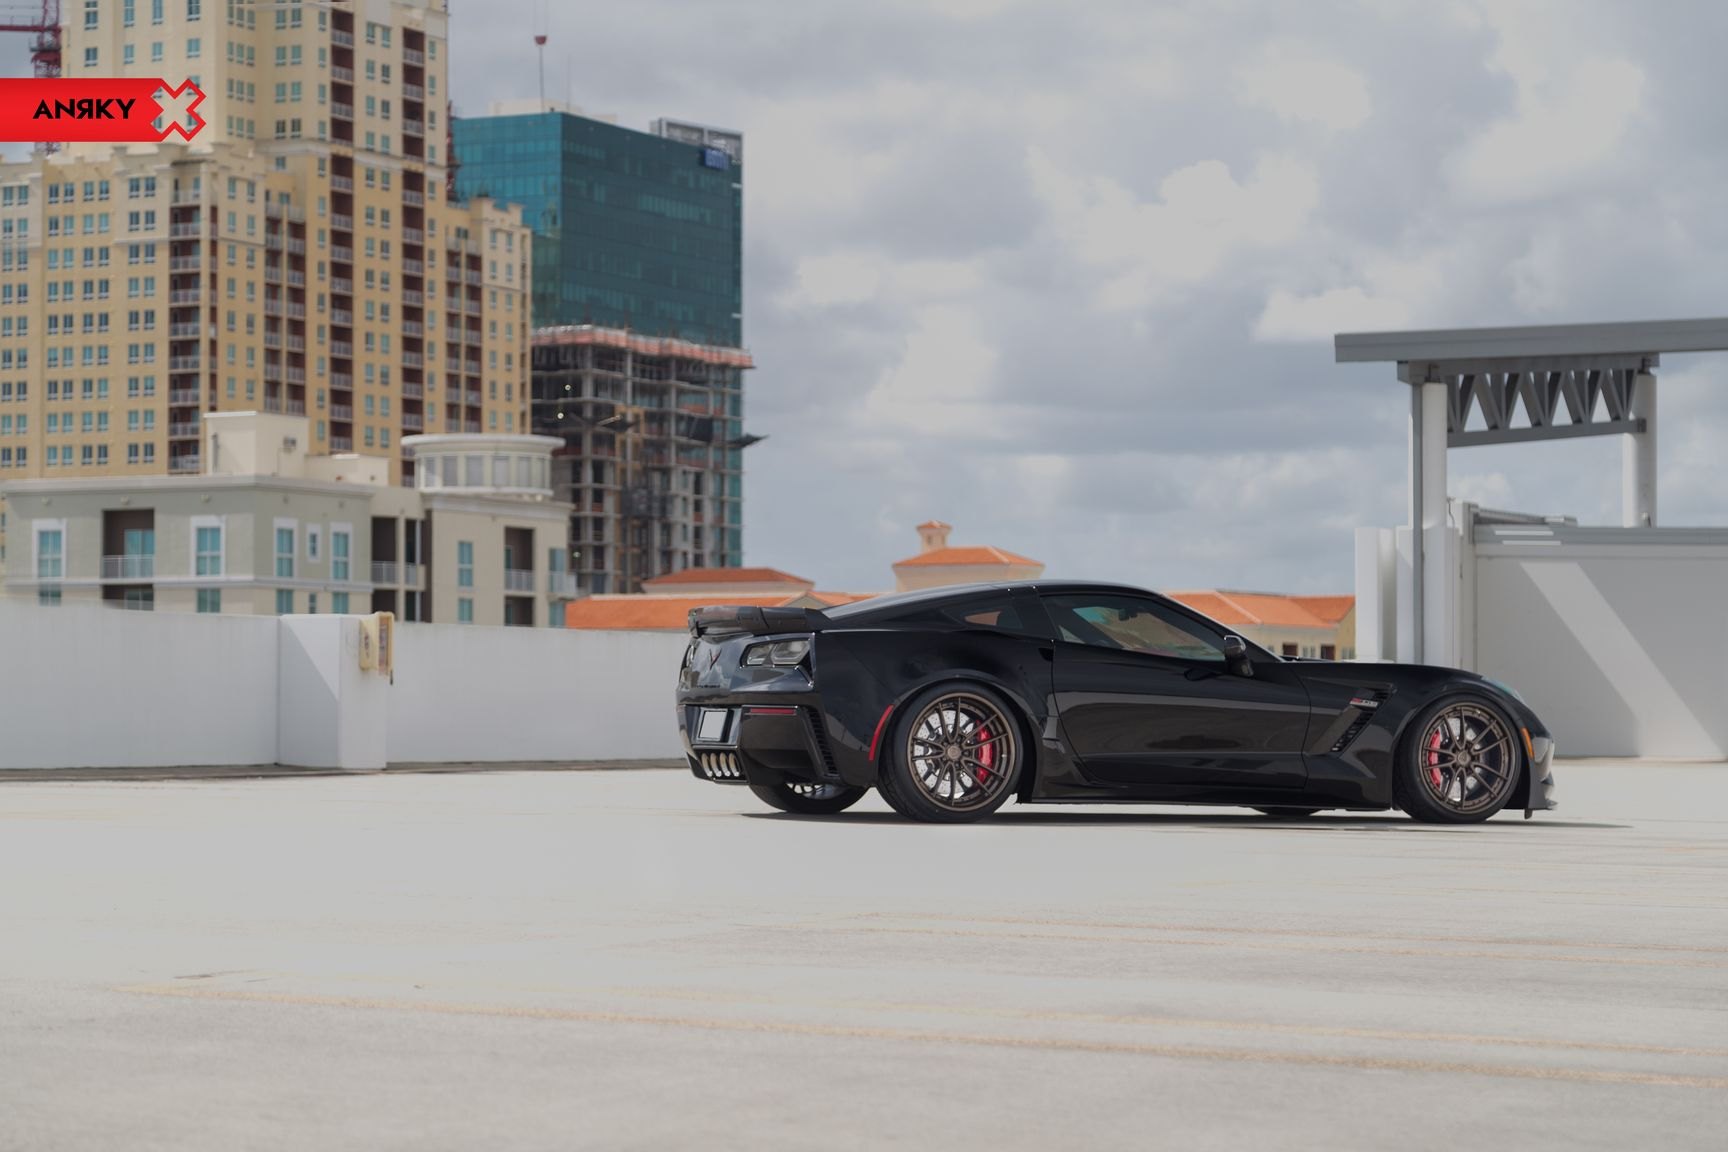 Anrky Rims with Red Brakes on Black Chevy Corvette - Photo by Anrky Wheels